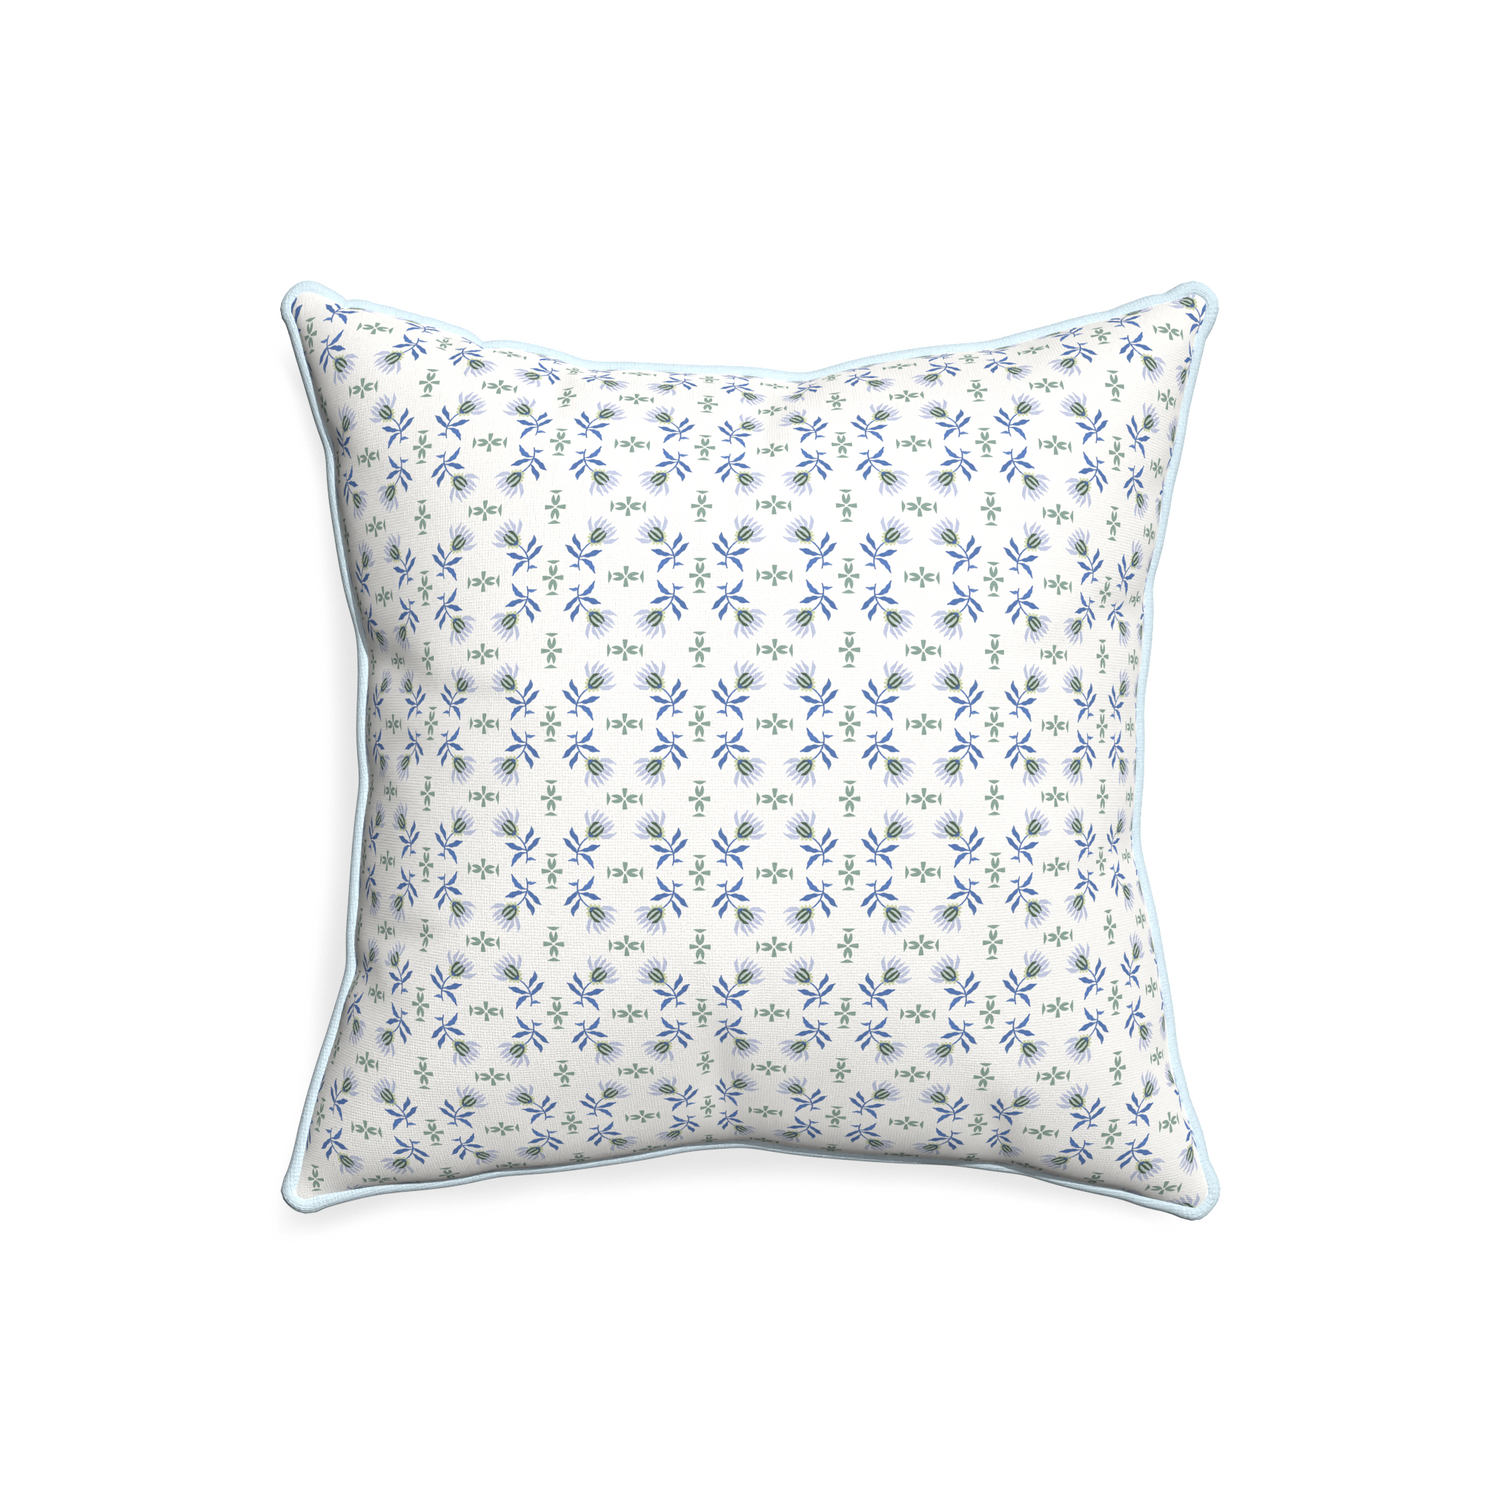 20-square lee custom blue & green floralpillow with powder piping on white background